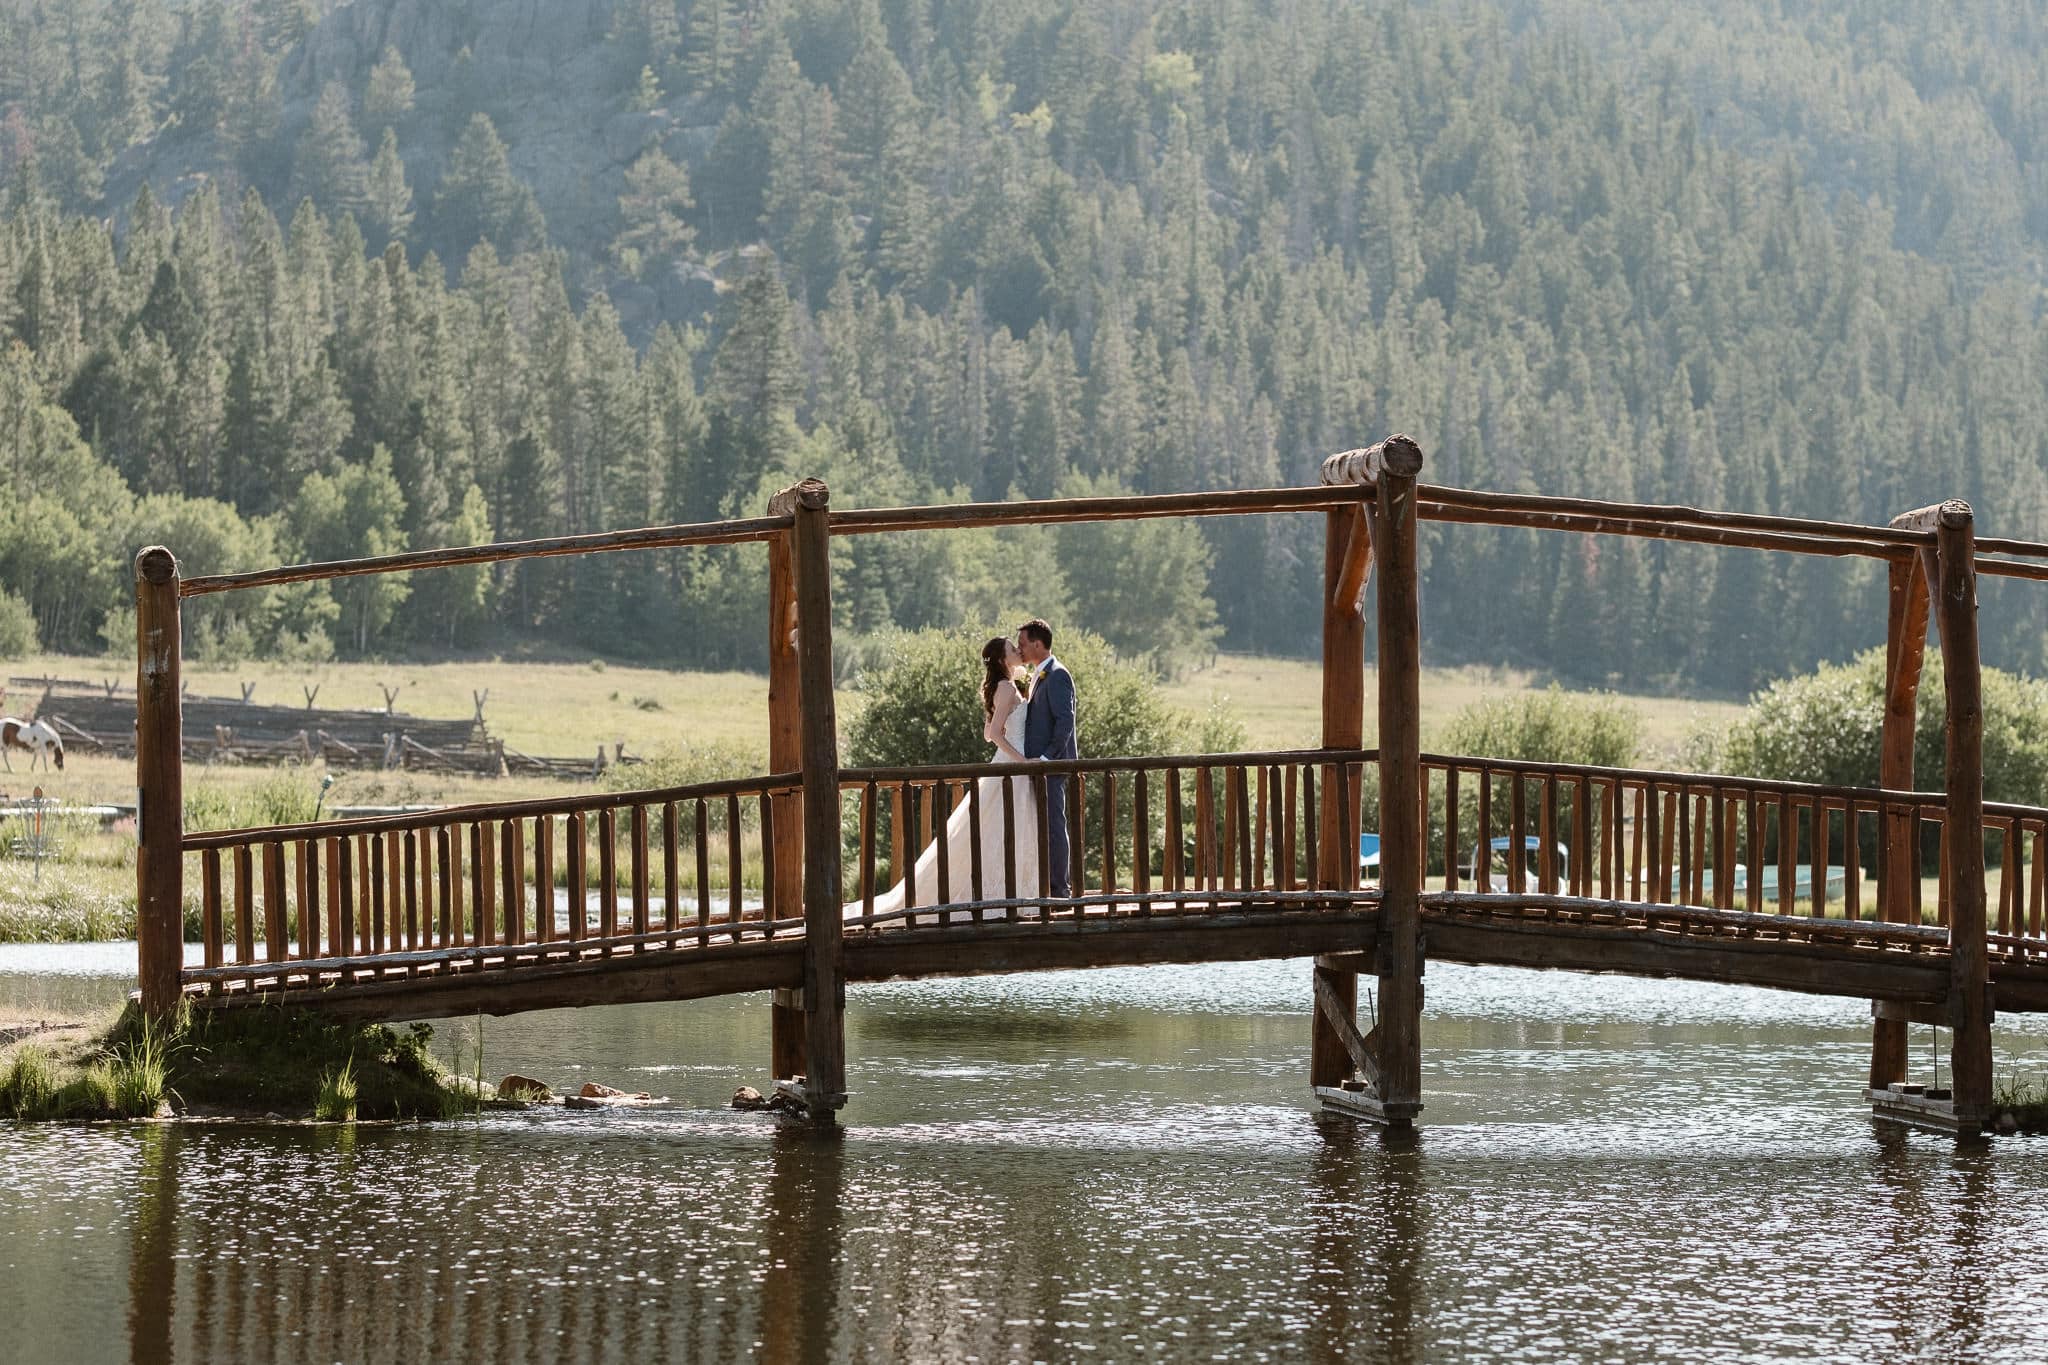 Red Feather Lakes elopement photographer, Colorado intimate cabin wedding, bride and groom first look on bridge